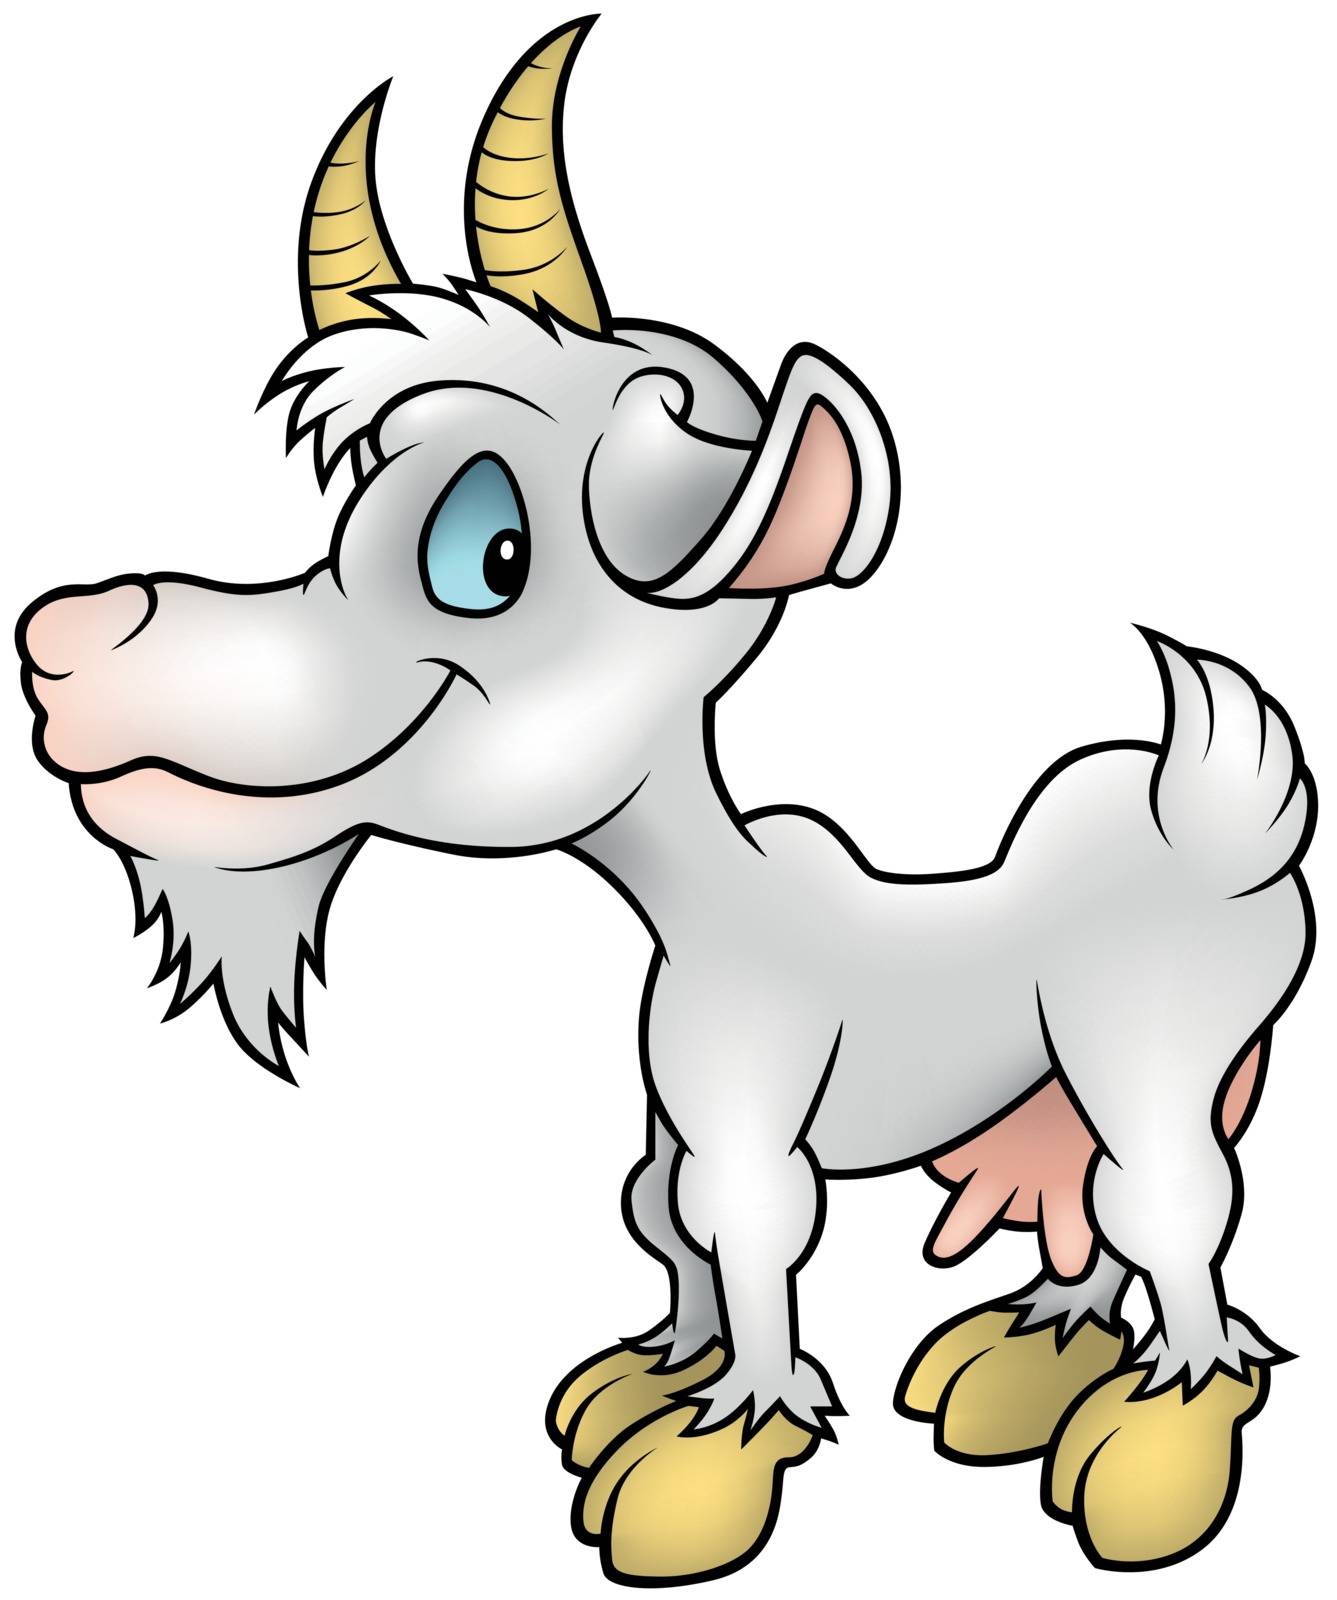 White Goat with Blue Eyes - Colored Cartoon Illustration, Vector